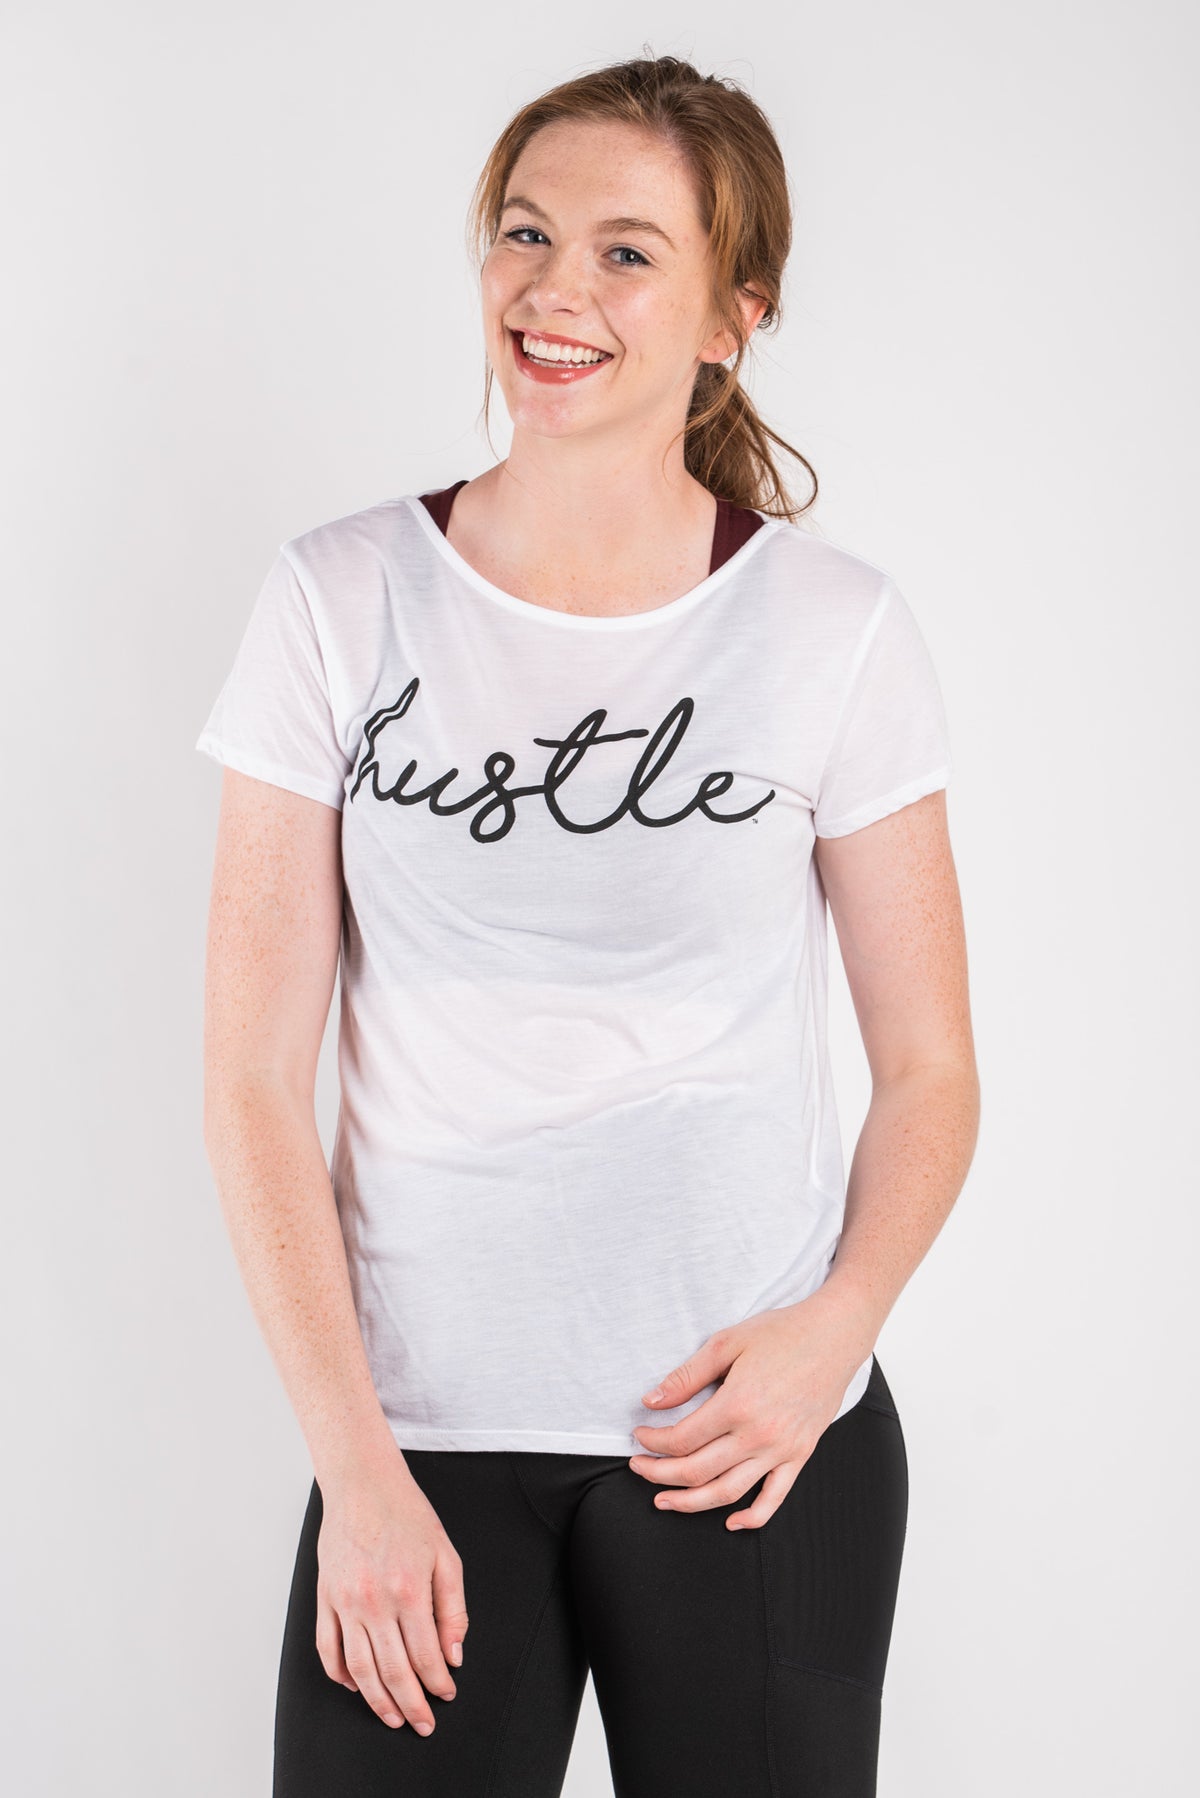 Hustle script criss cross back tee white - Stylish T-shirts - Trendy Graphic T-Shirts and Tank Tops at Lush Fashion Lounge Boutique in Oklahoma City